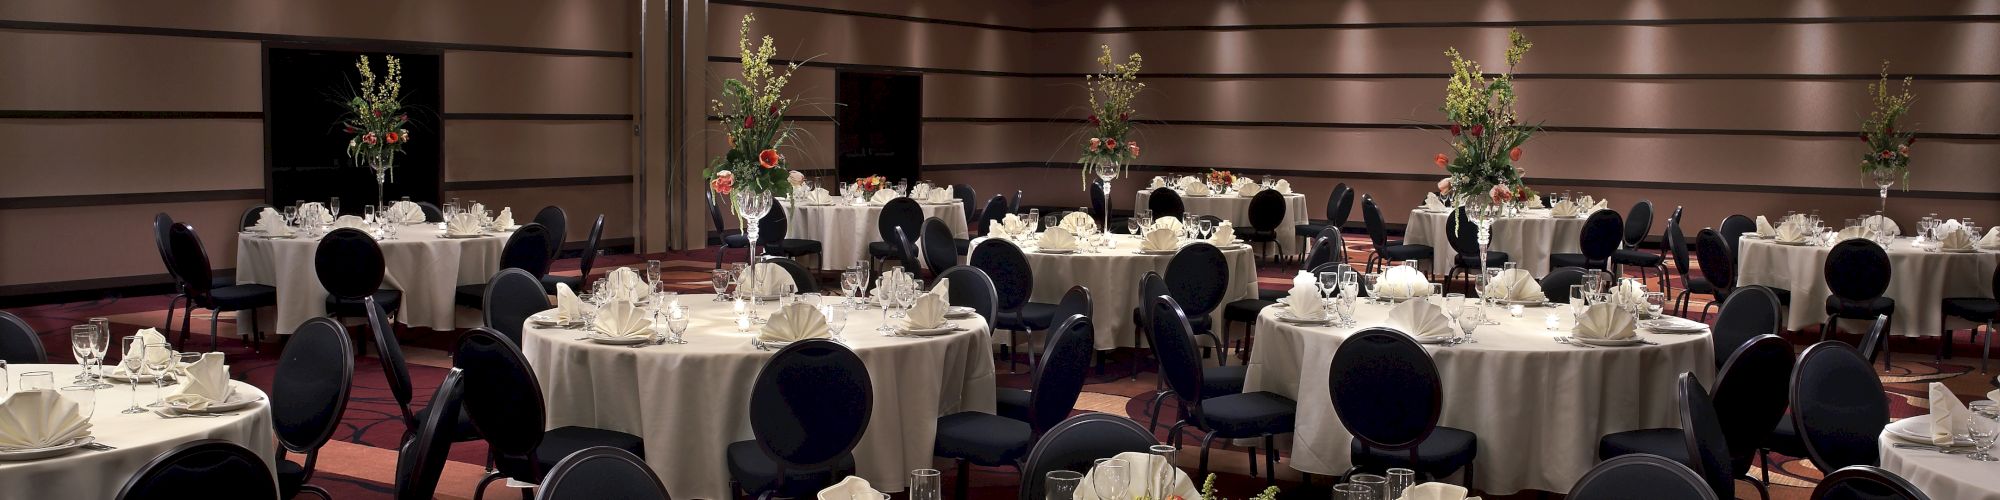 The image shows a large, elegantly decorated banquet hall with round tables set with white tablecloths, napkins, glasses, and floral centerpieces.